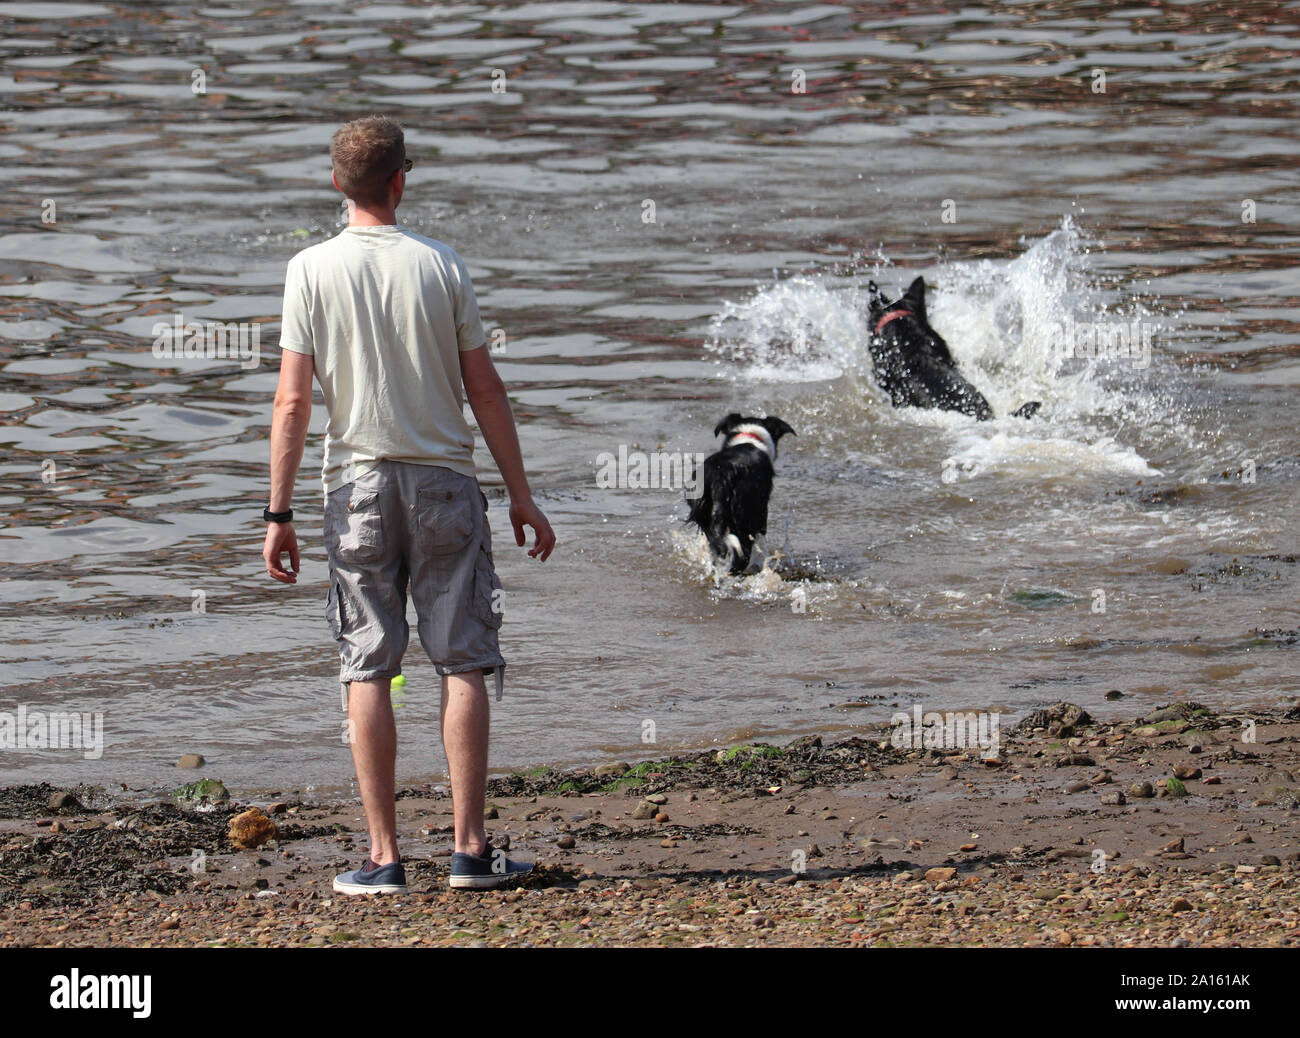 A man watches as two dogs running into water to retrieve a ball. Stock Photo